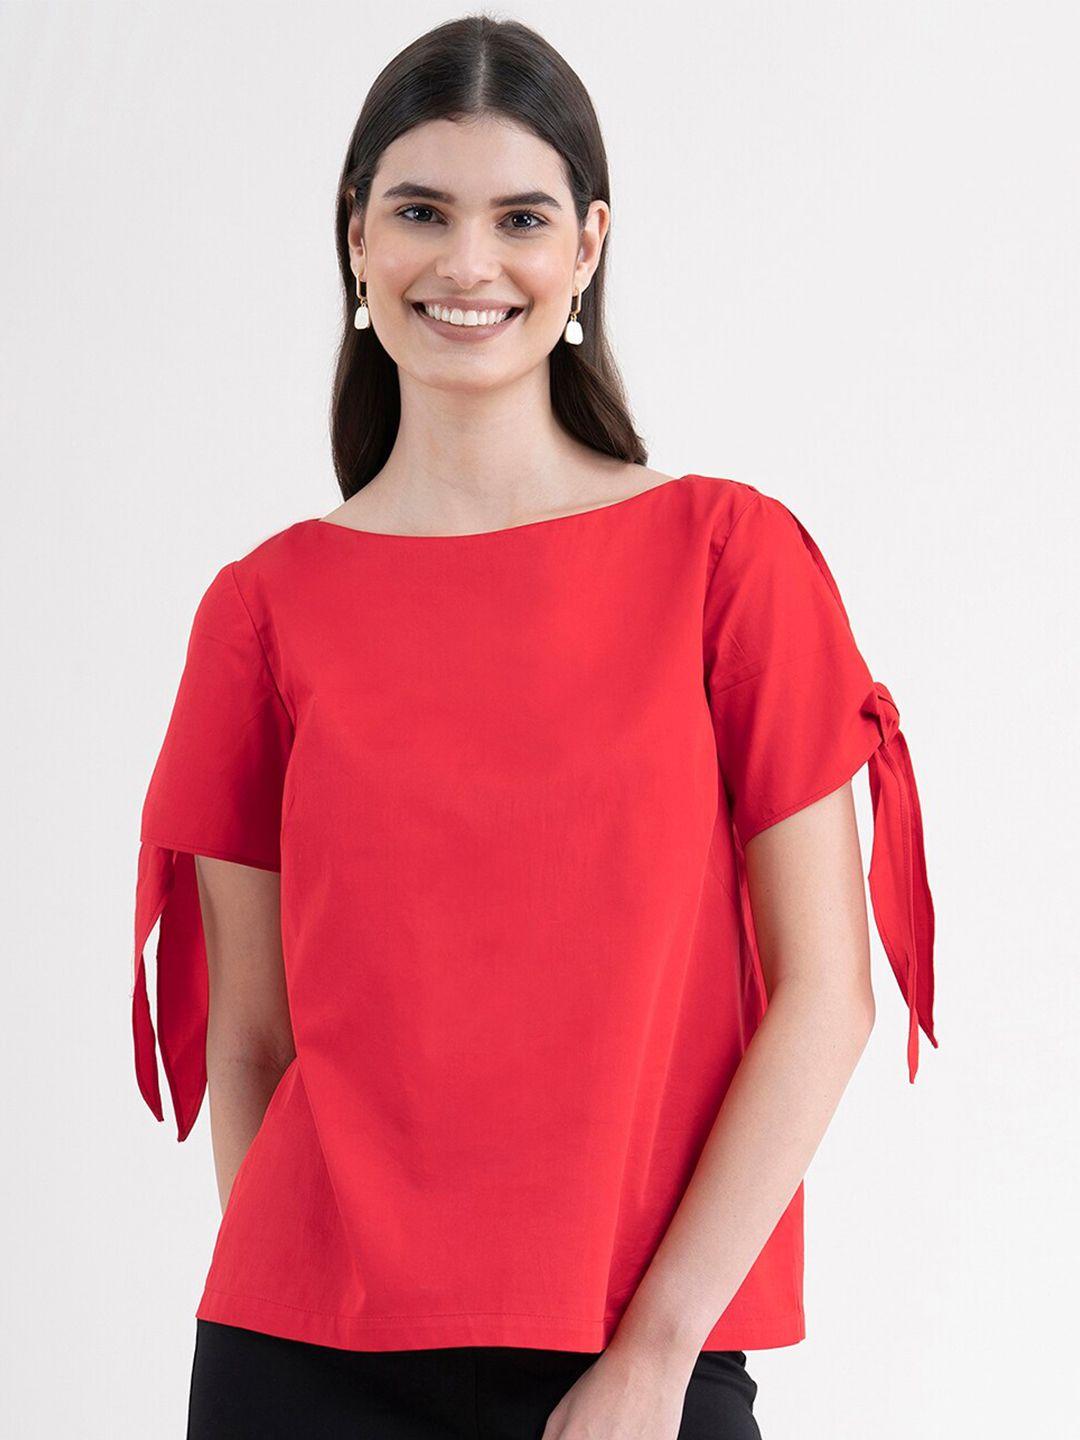 fablestreet women red cotton tie up sleeve top